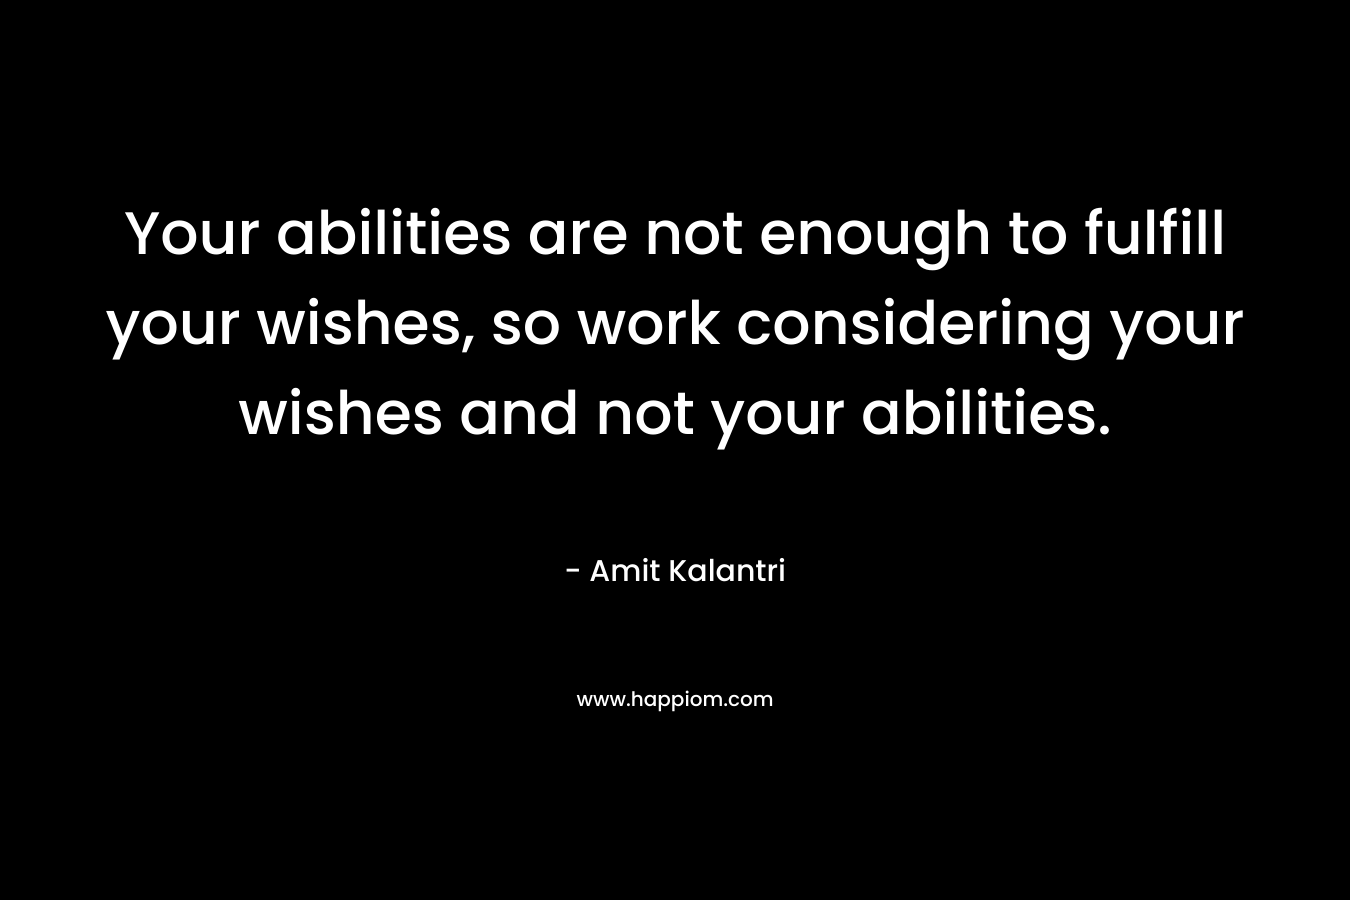 Your abilities are not enough to fulfill your wishes, so work considering your wishes and not your abilities.